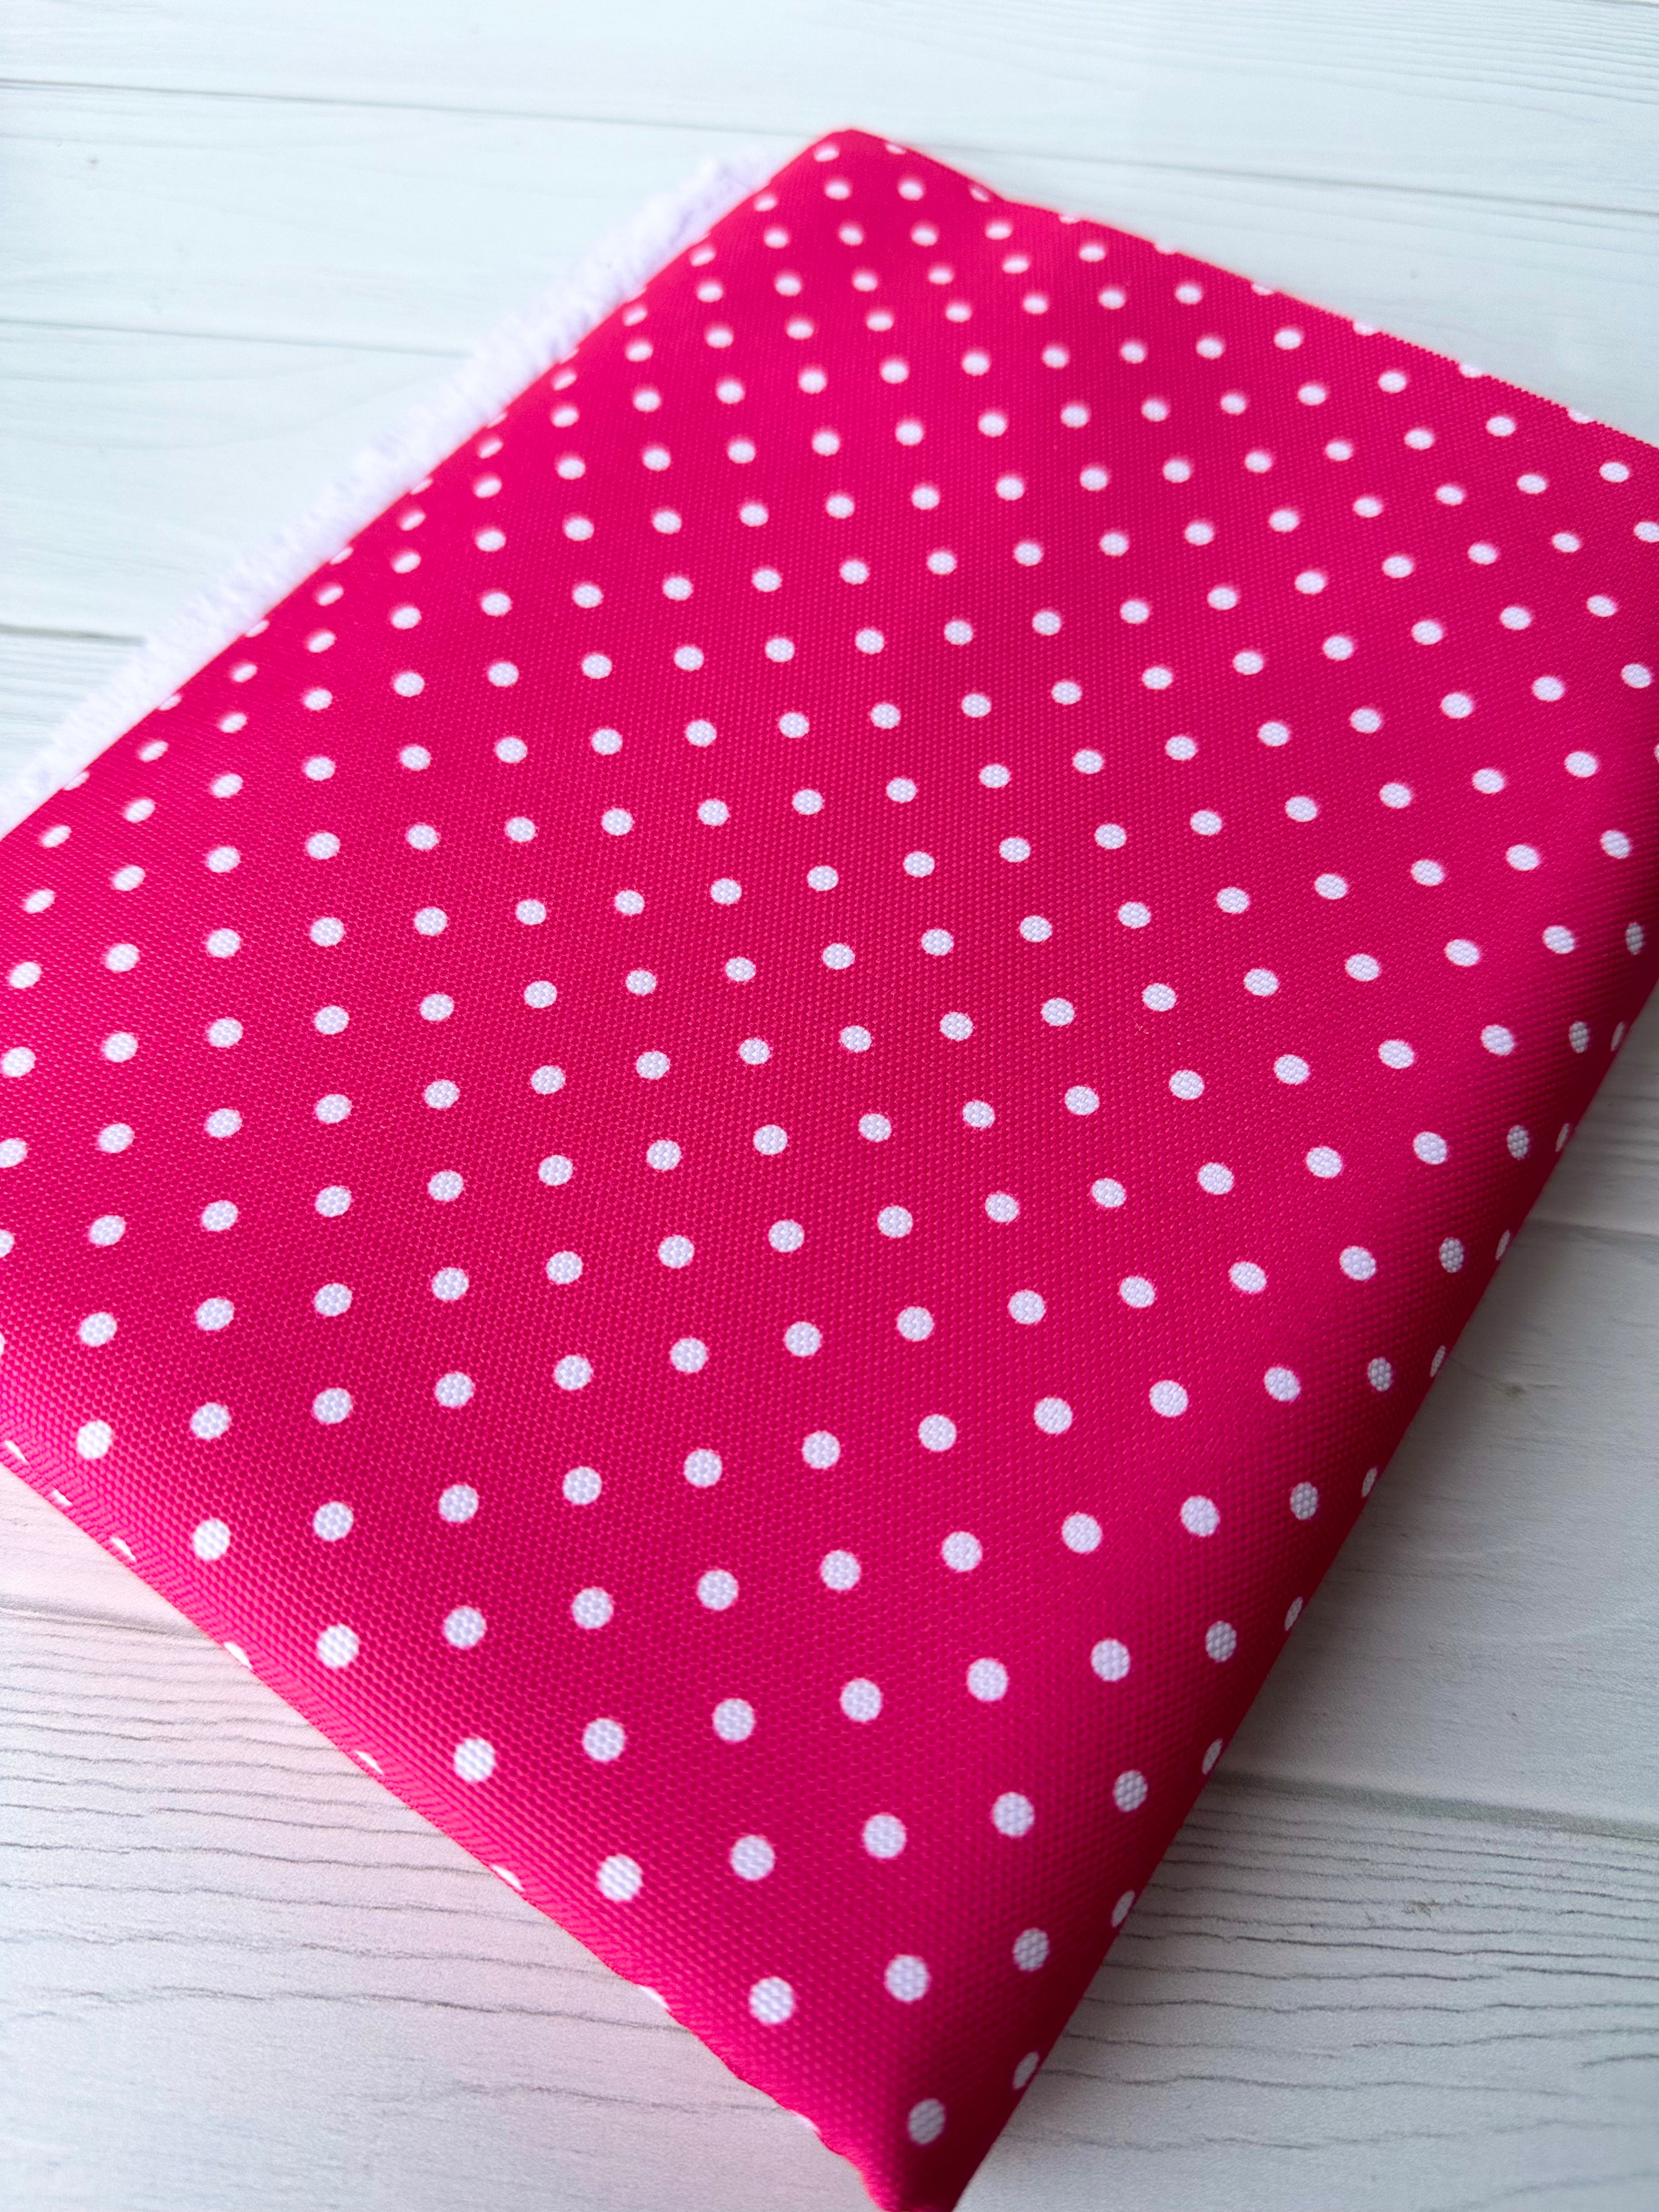 Hot Pink And White Mini Dots Waterproof Canvas